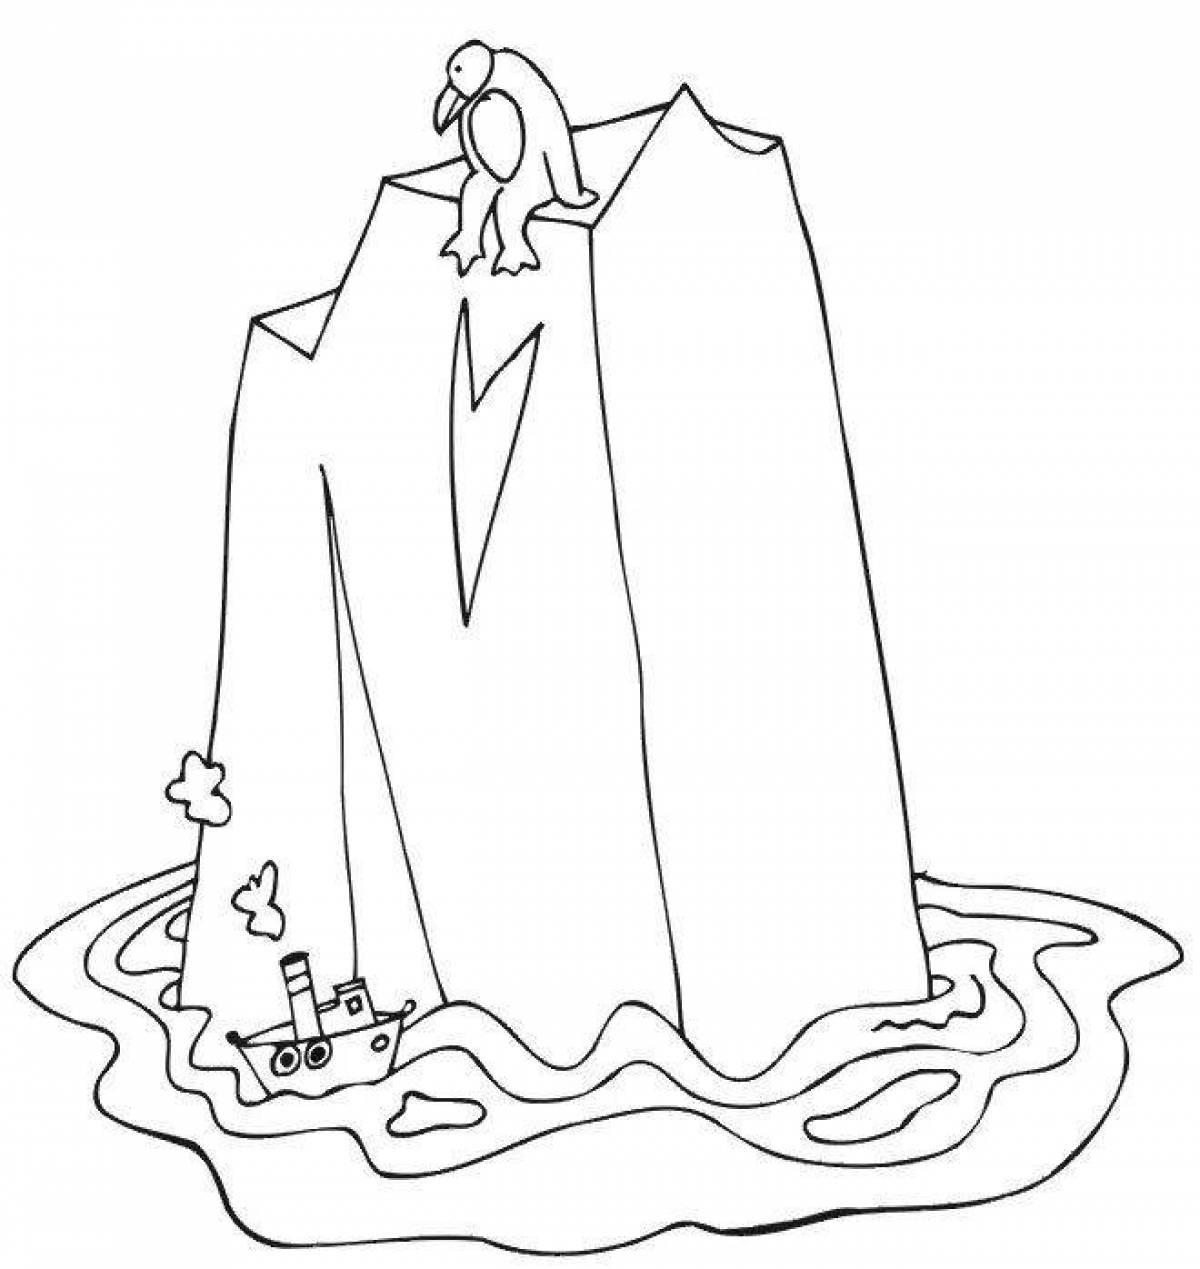 Beautiful ice floe coloring page